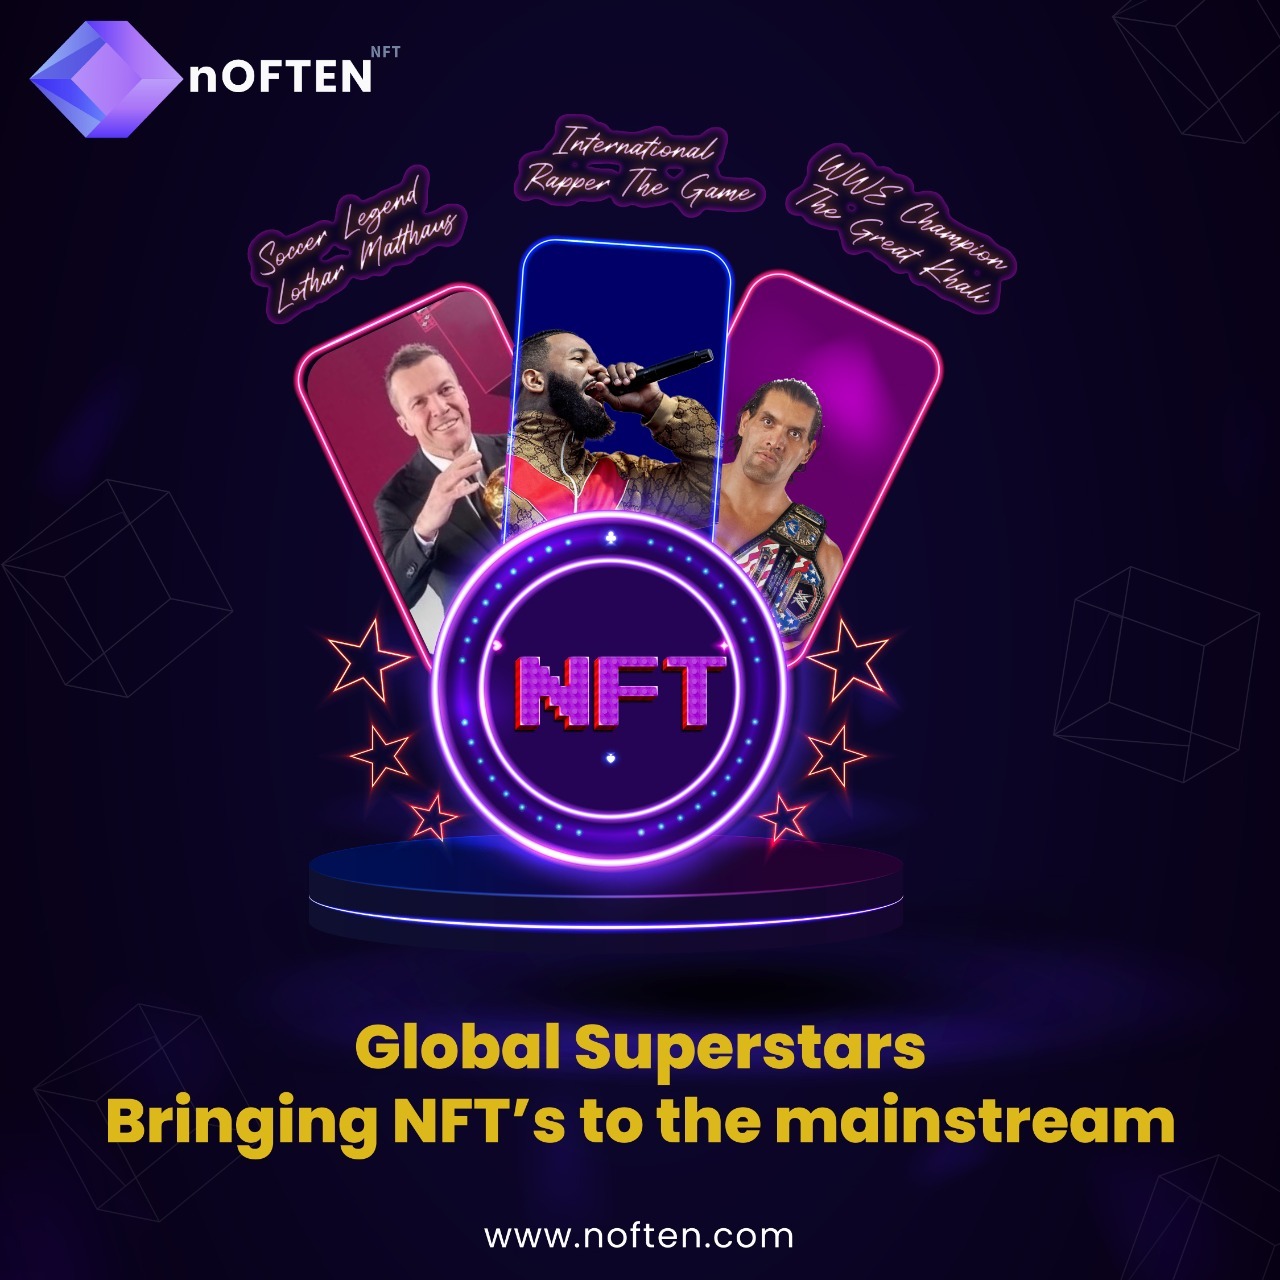 Soccer Legend Lothar Matthaus, WWE Champion The Great Khali and International Rapper The Game, among 30 others, joined nOFTEN to launch their NFTs